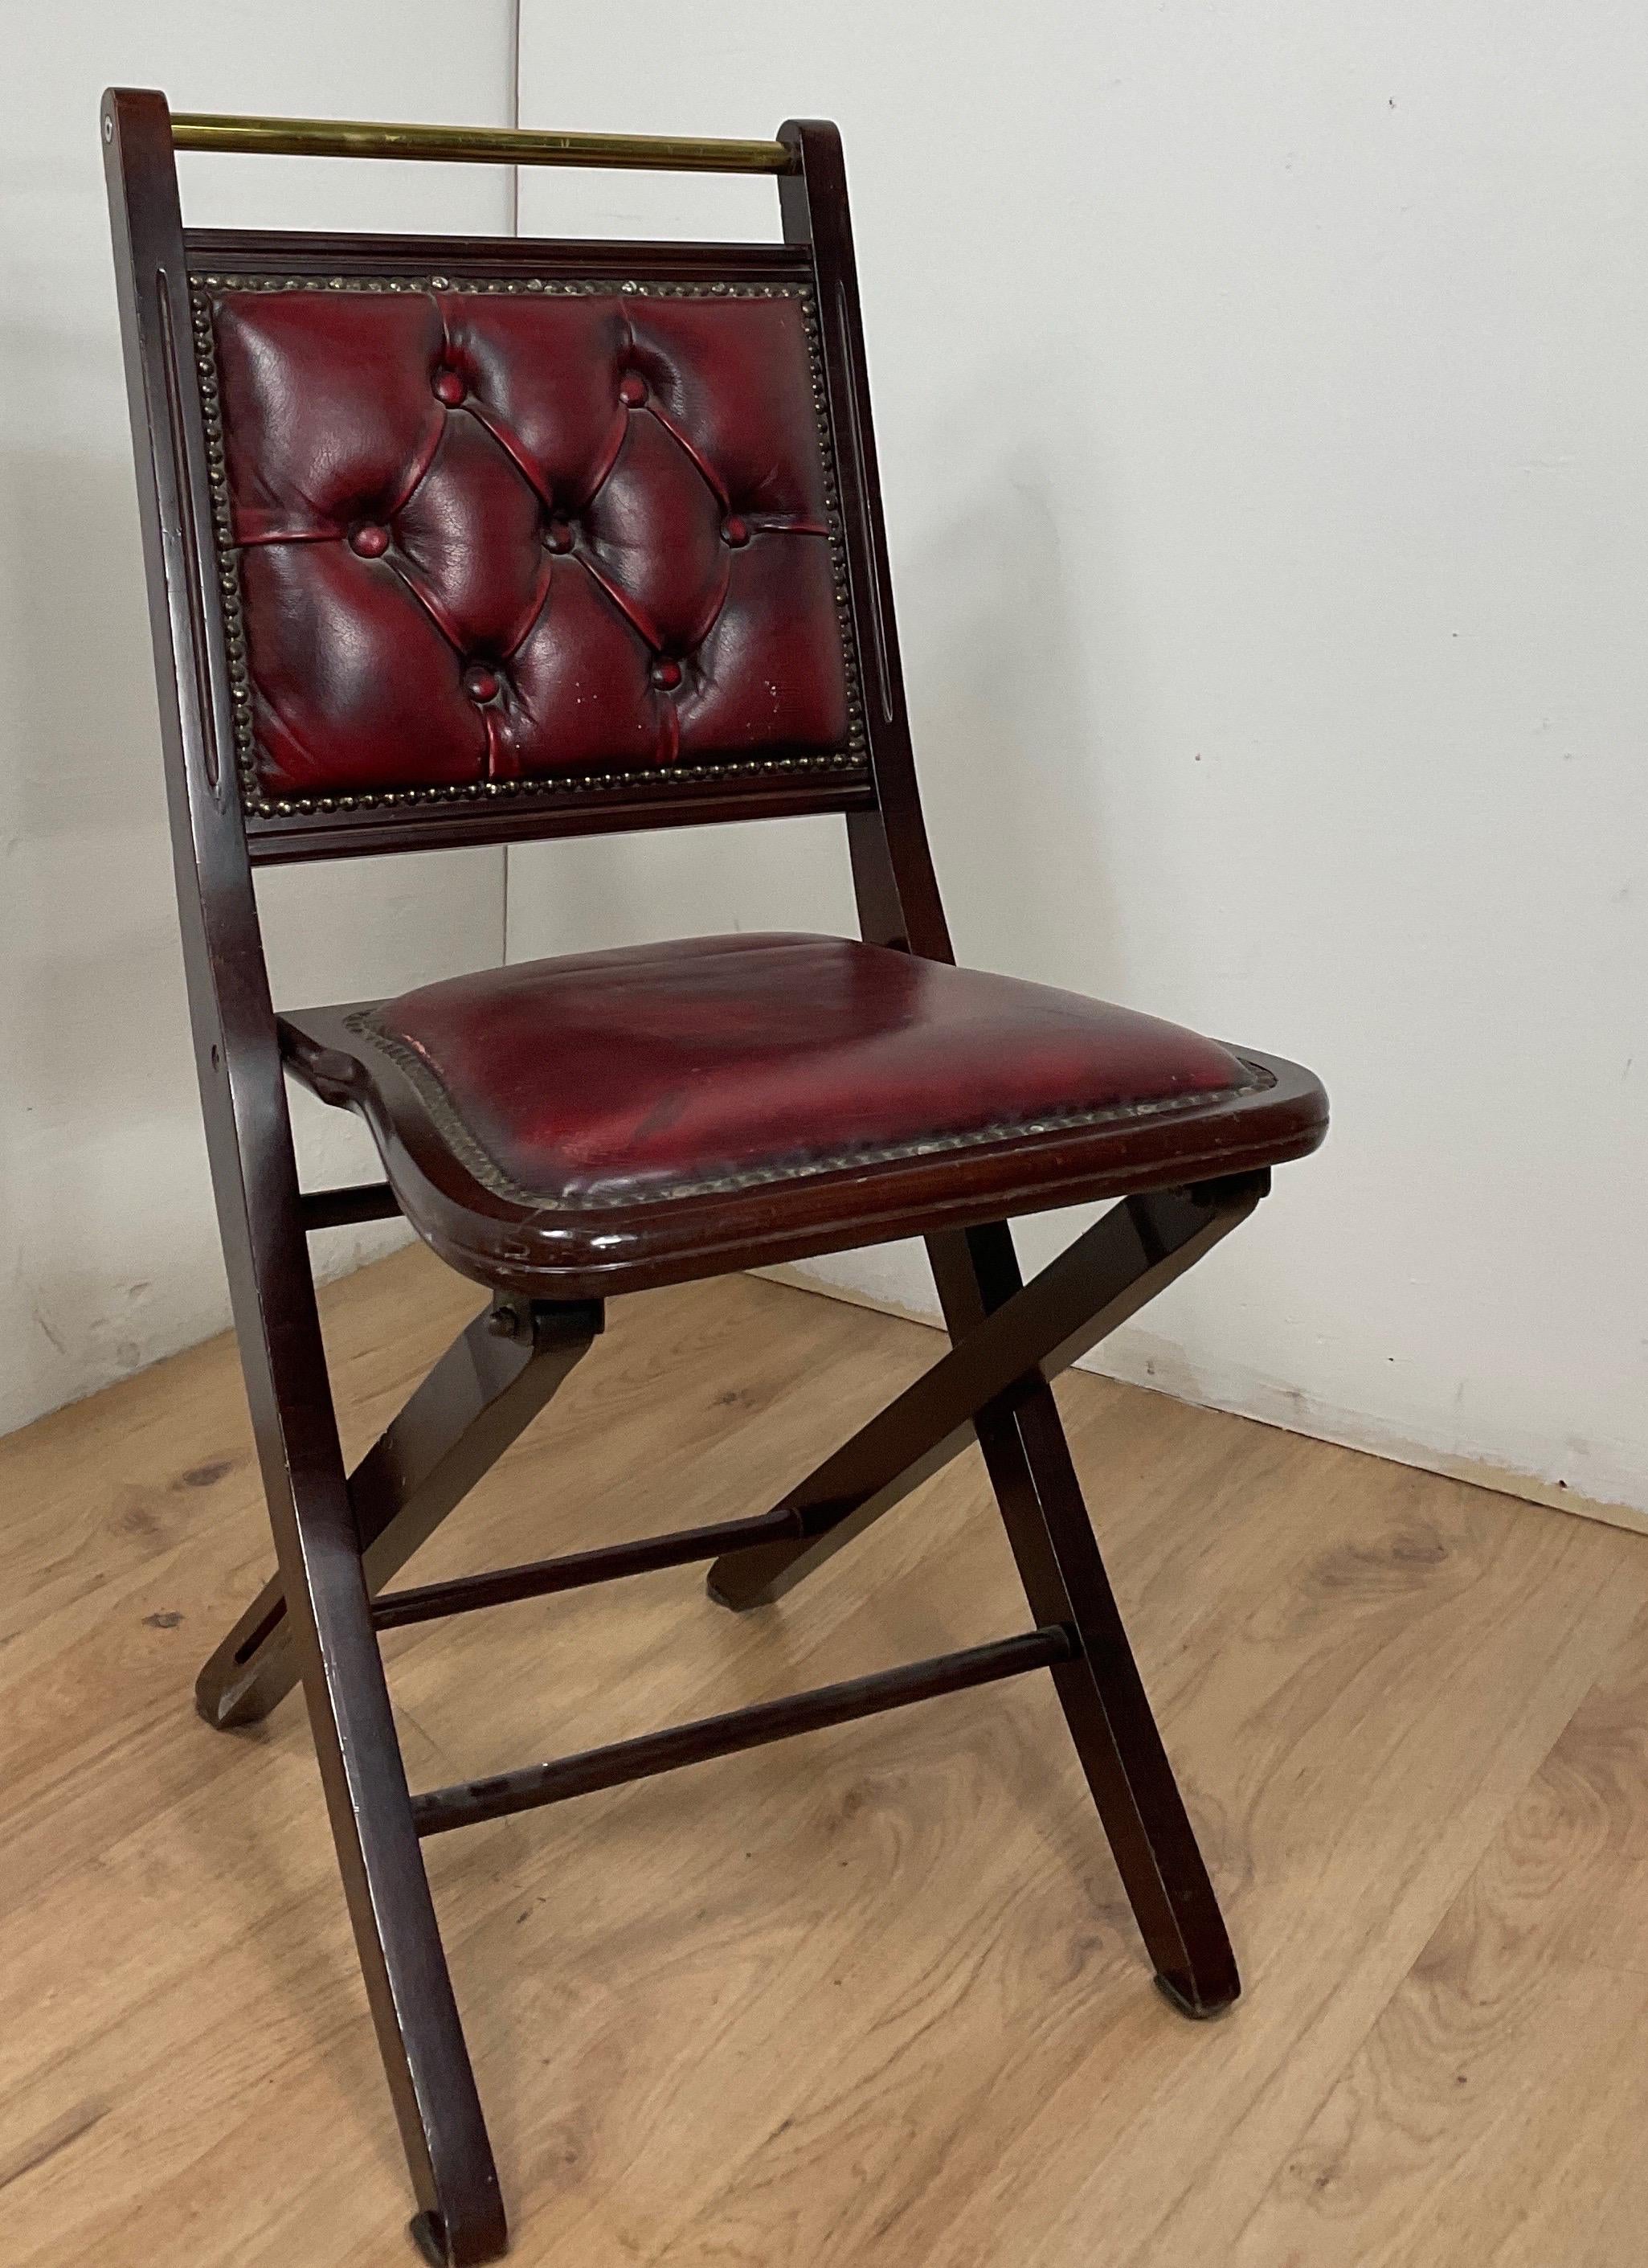 Italian Style folding chair with leather seat and back Craftwork made in italy For Sale